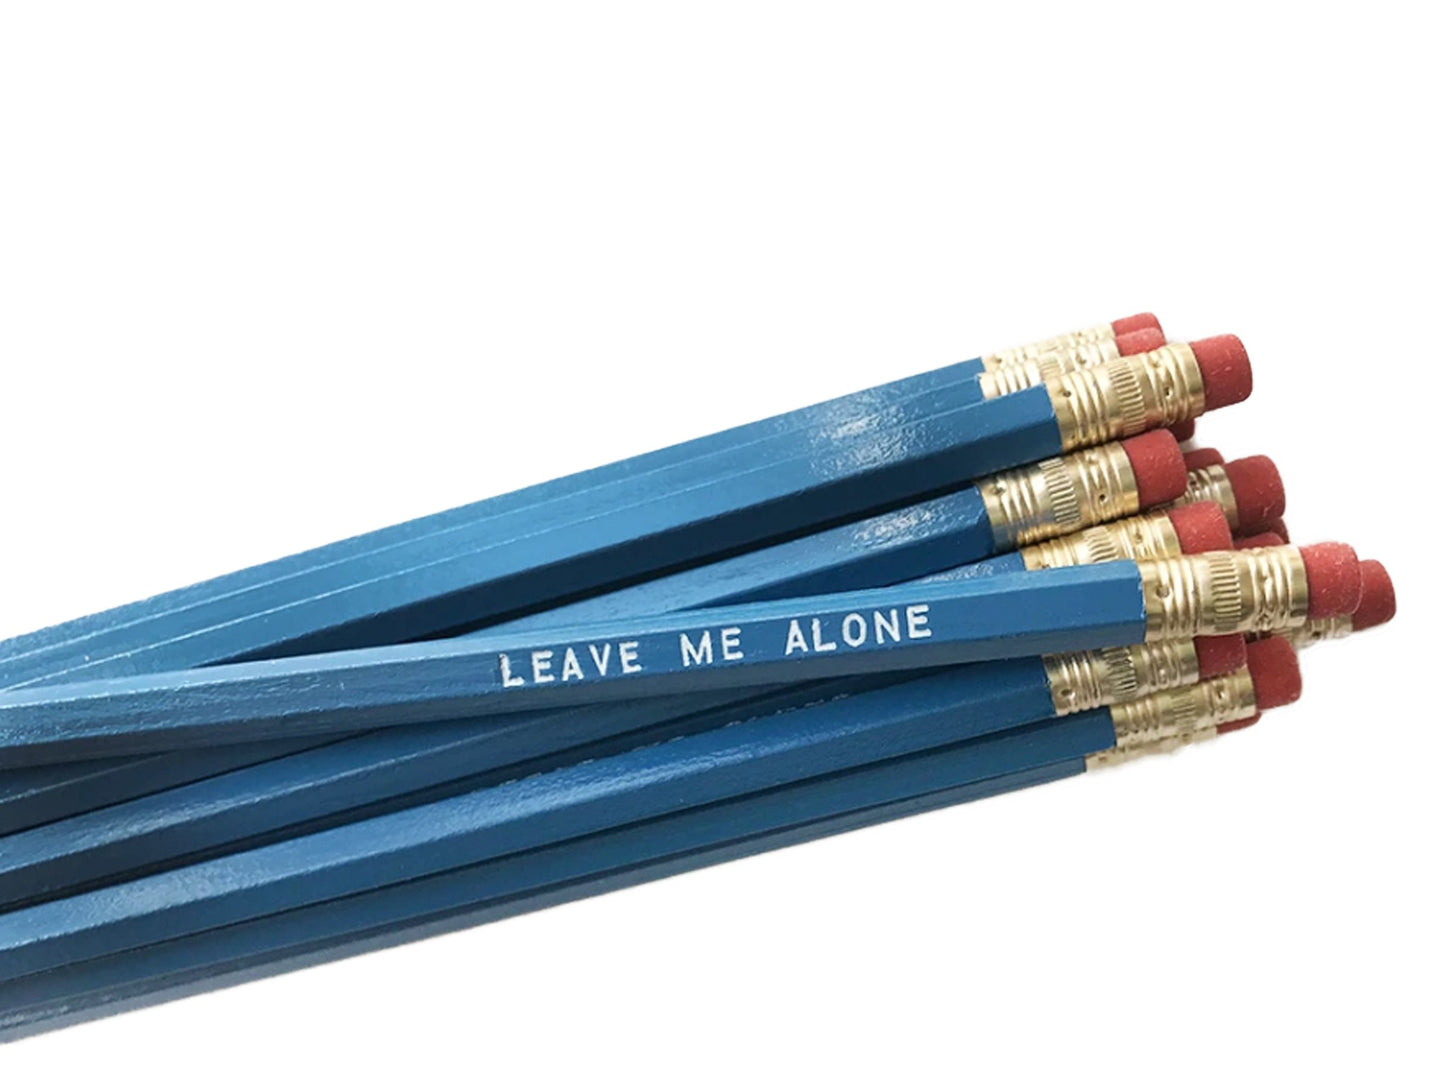 by Sweet Perversion  Listing for one Leave Me Alone Pencil. Wood pencil with #2 lead, certified non-toxic, latex-free synthetic eraser & unsharpened.